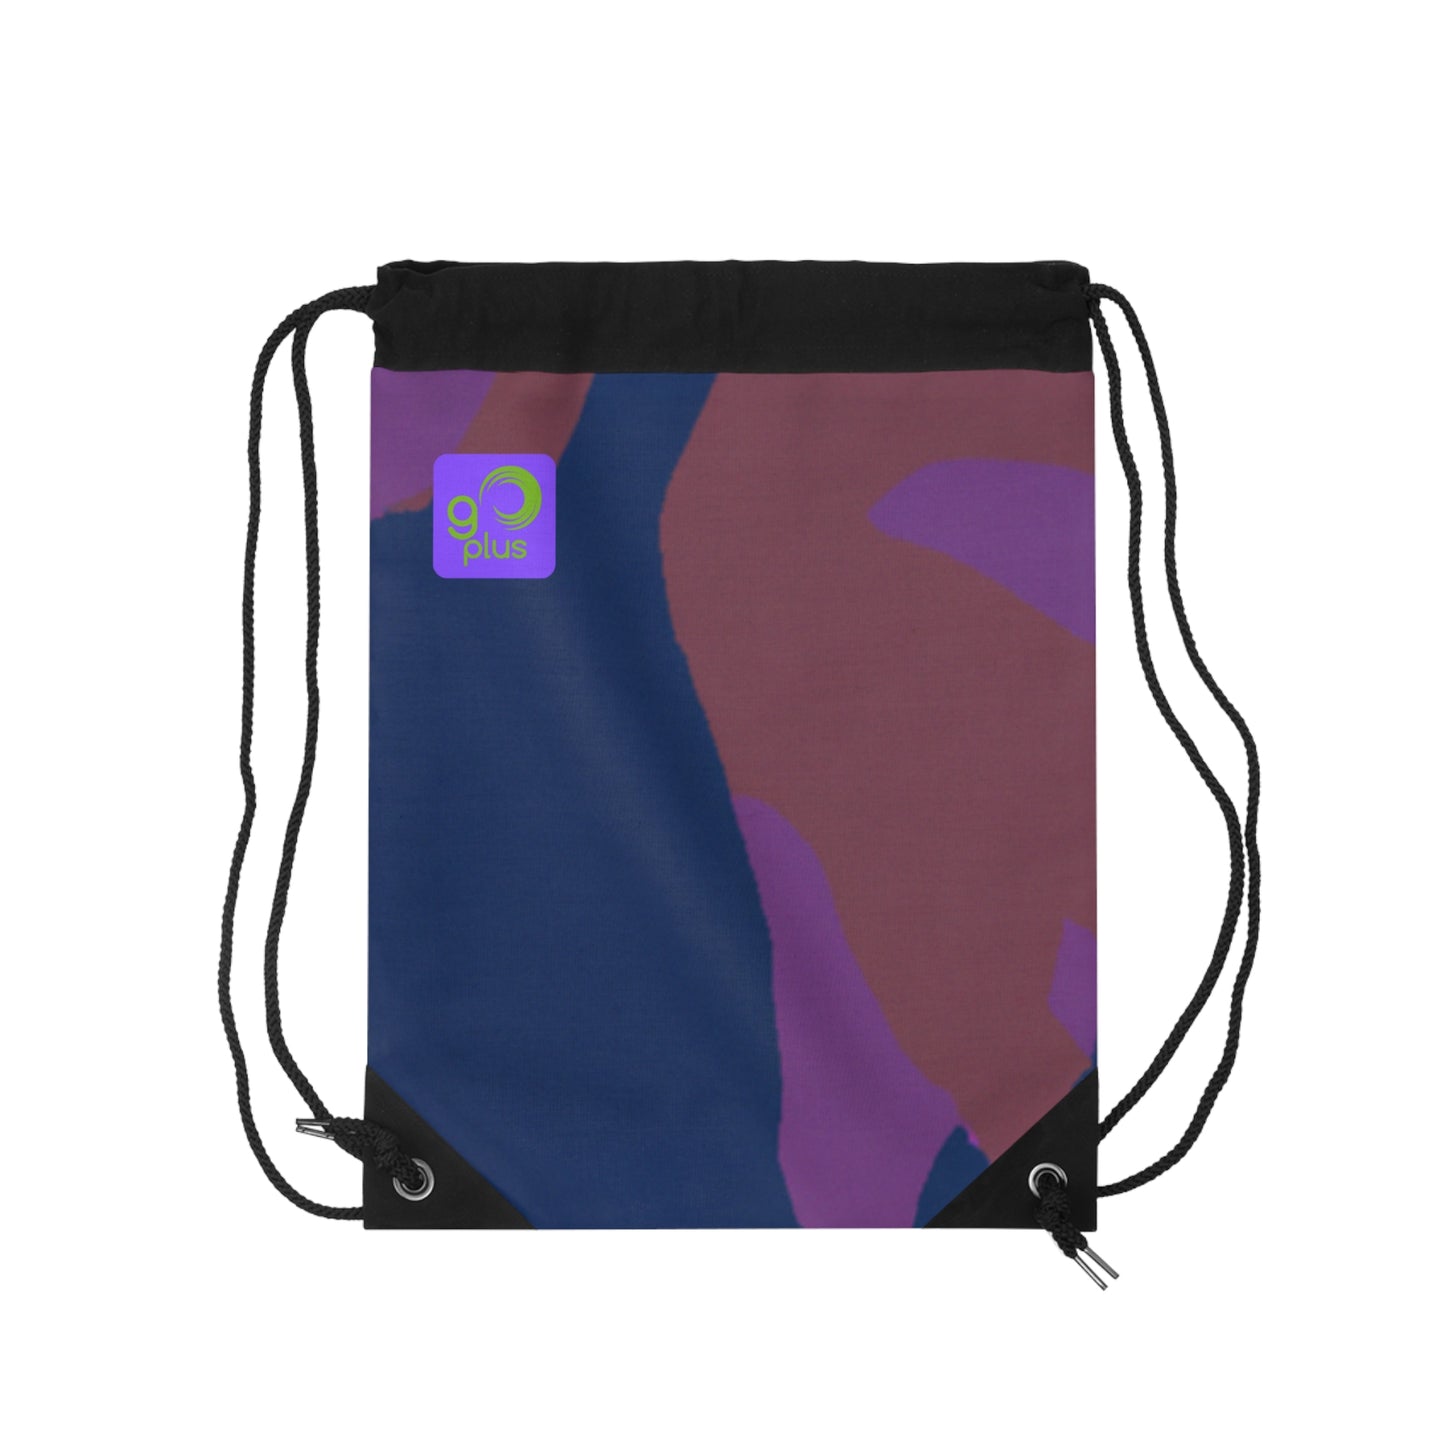 "Athletic Expressions: Capturing a Sporting Moment" - Go Plus Drawstring Bag